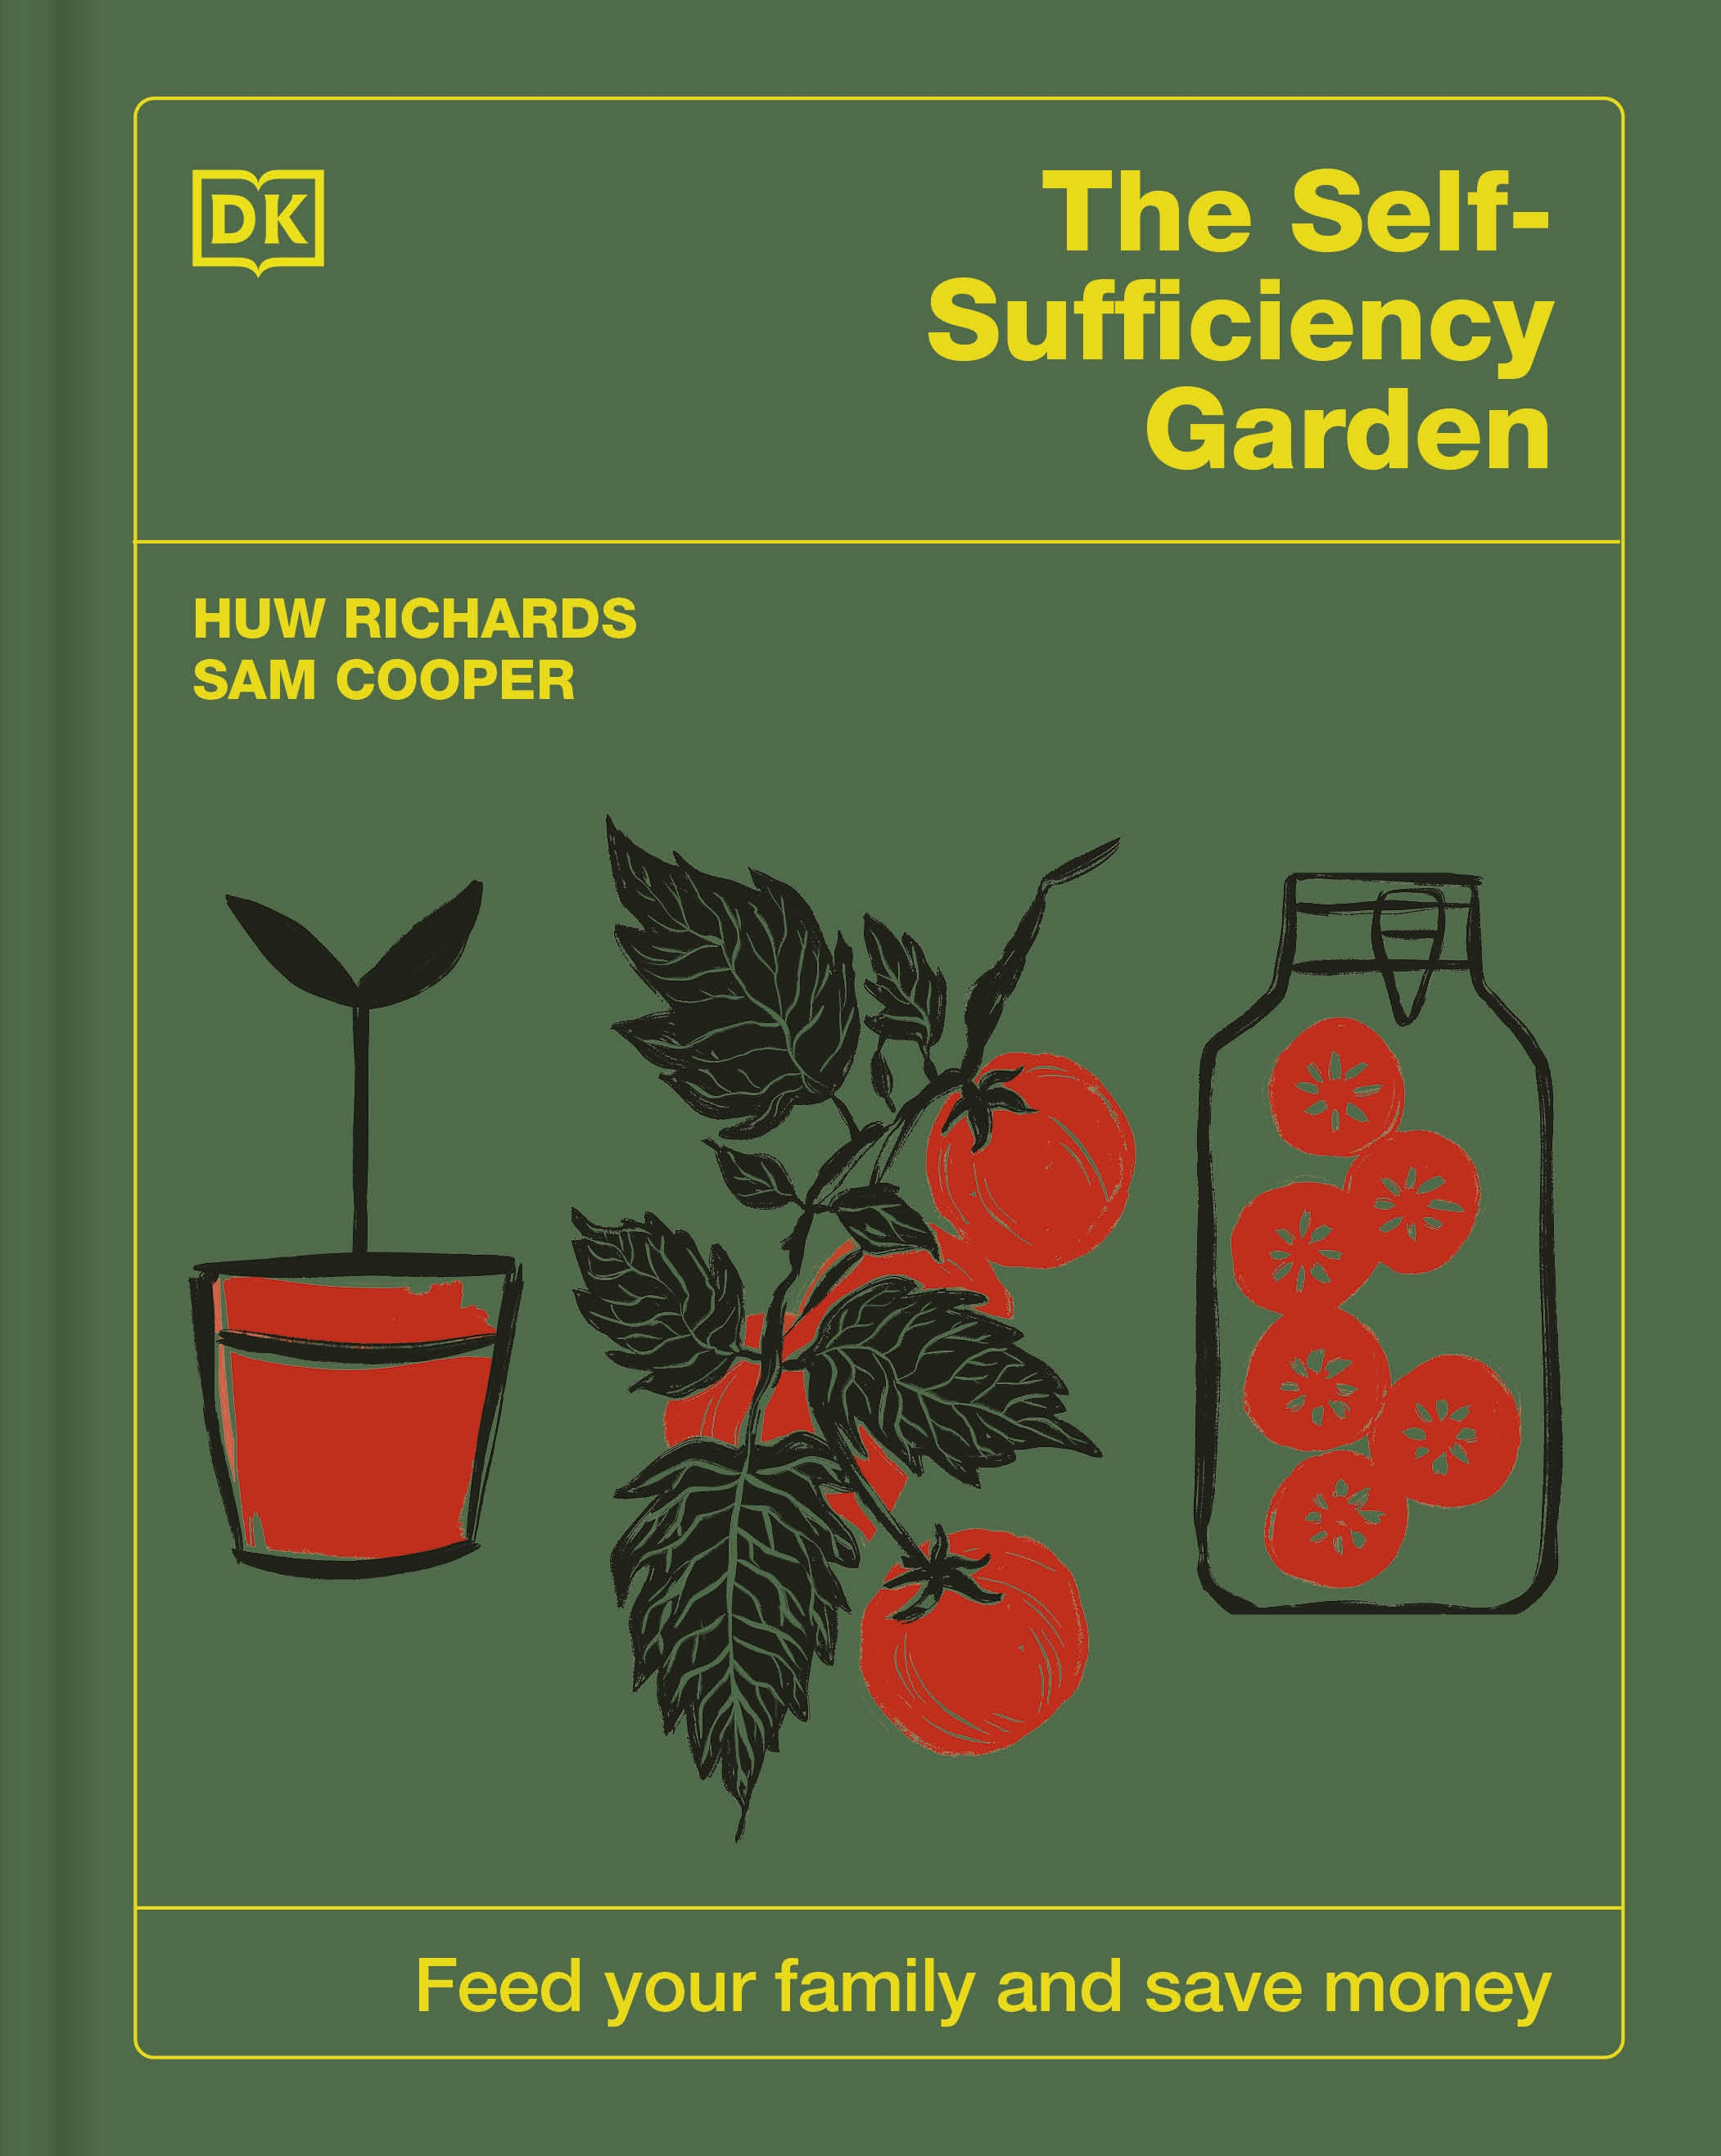 Book jacket of The Self Sufficiency Garden by Huw Richards and Sam Cooper (DK/PA)